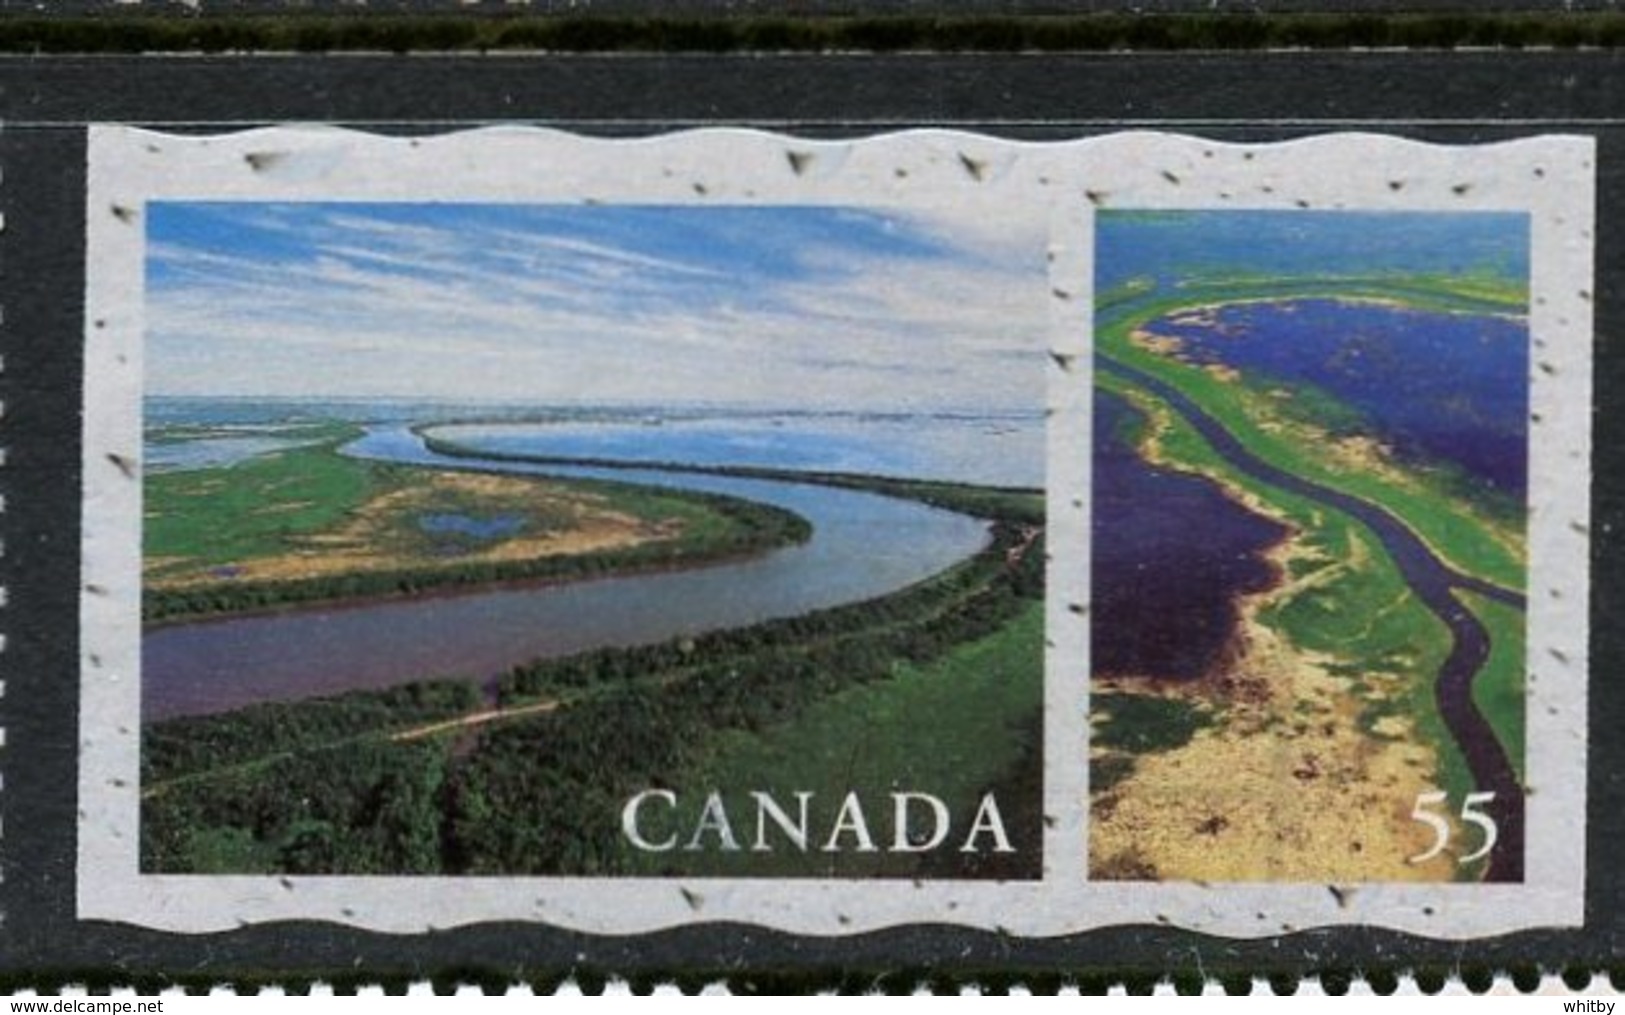 Canada 2000 55 Cent Red River Manitoba Issue #1854d - Used Stamps